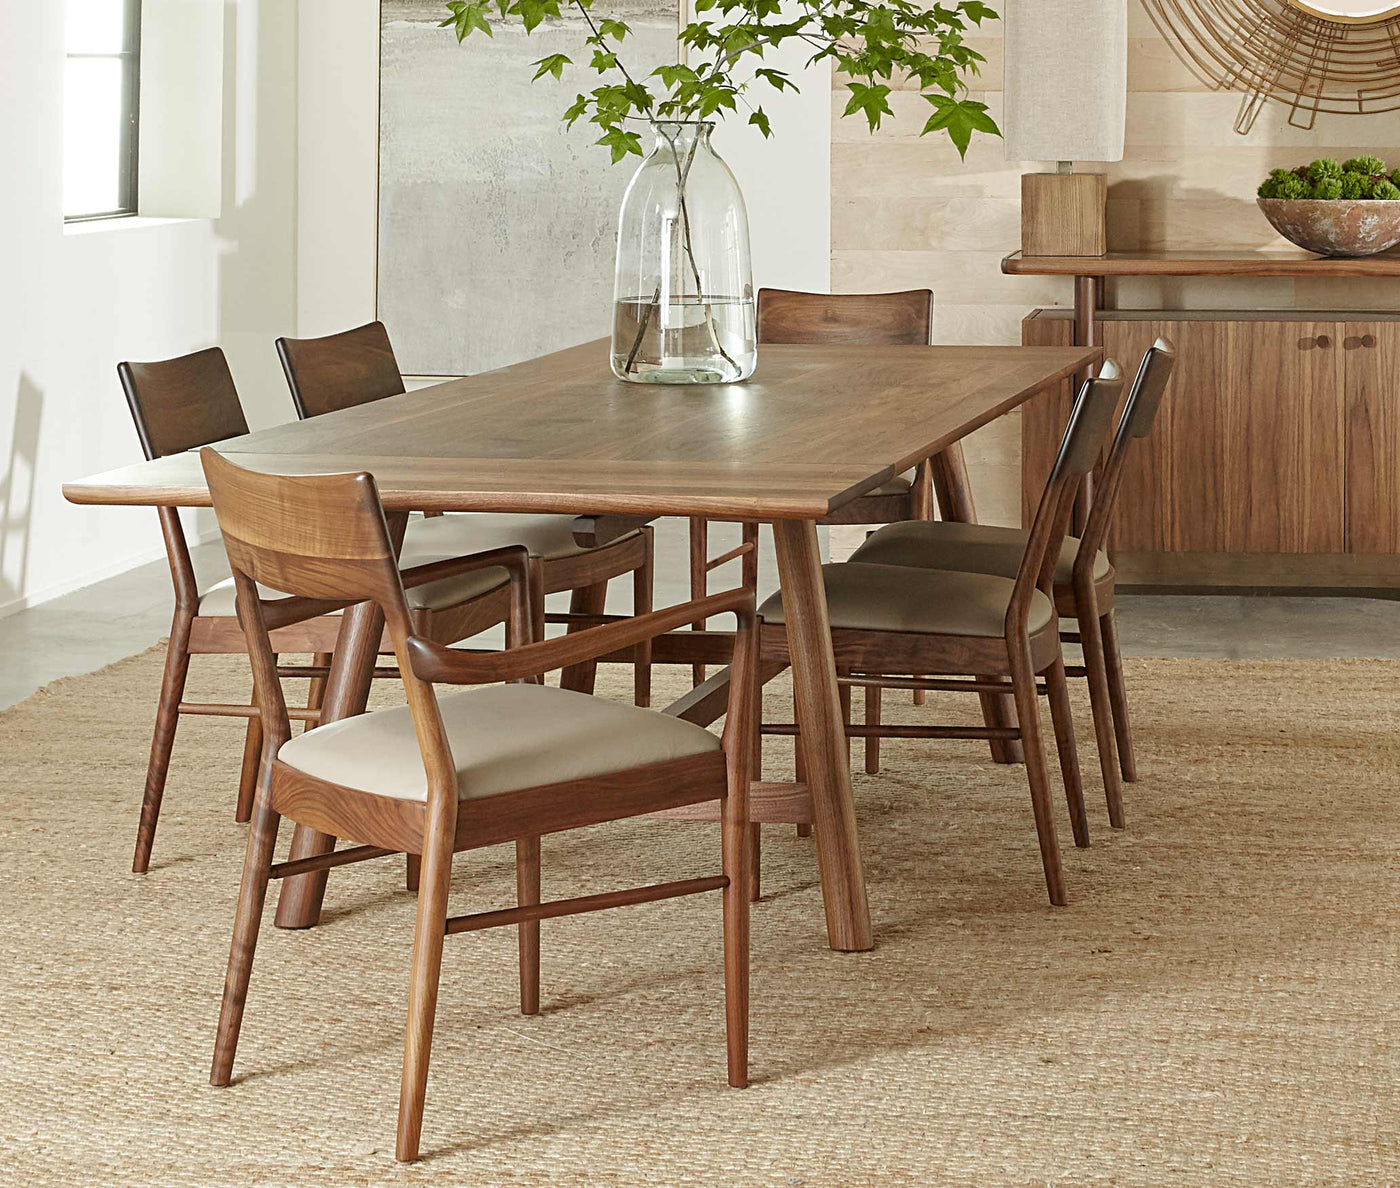 A Walnut Grove dining table surrounded by matching chairs that have white upholstered seats, there is a sideboard in the background and a clear vase full of greenery on the table.